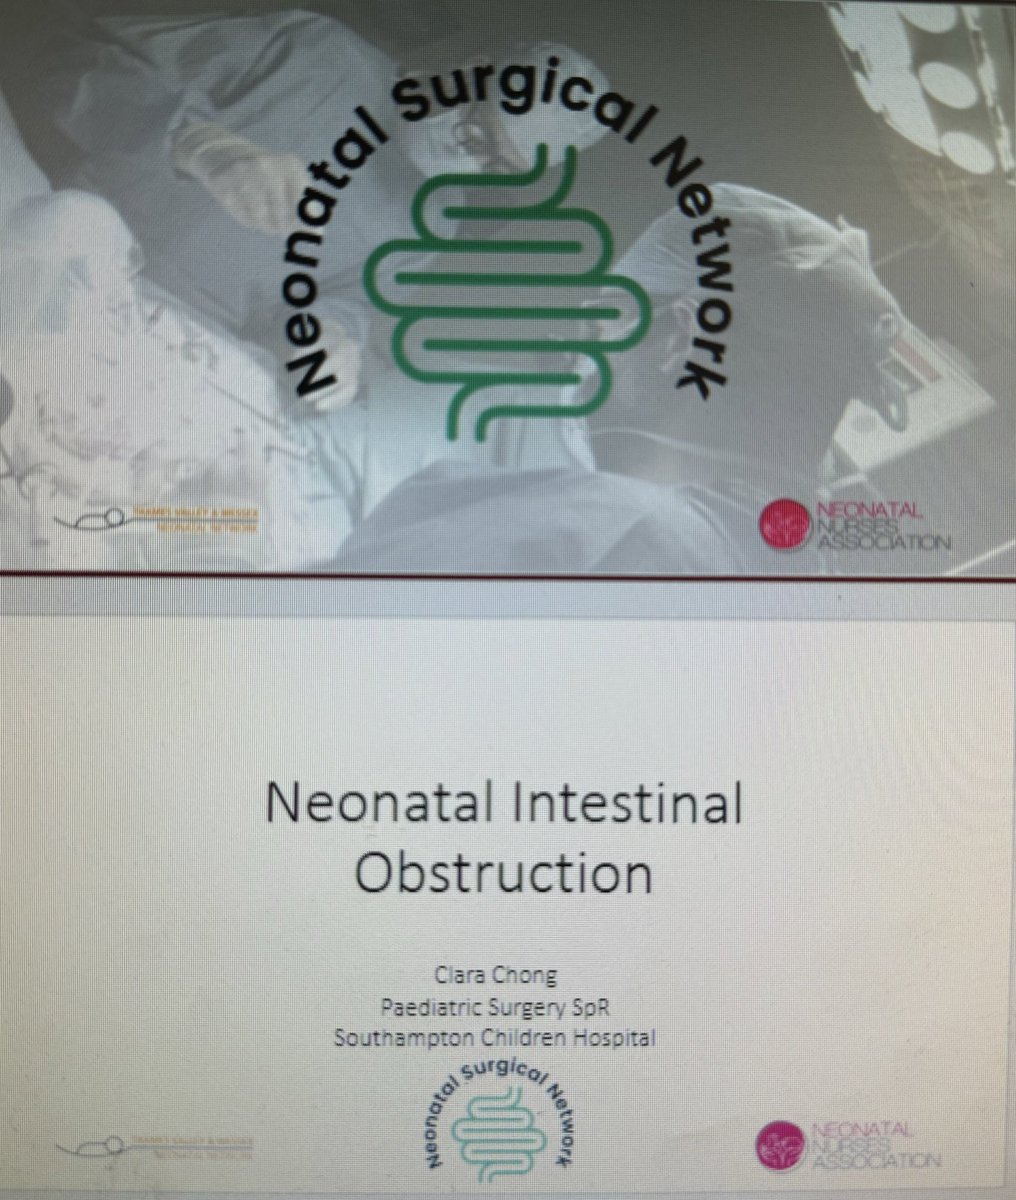 A reminder that a week today 5/6/24 2-3pm Neonatal Surgical Network session on MS Teams for TV & Wessex Network @TVWNeonatal link on NHS futures - NSN page. Topic ‘Neonatal Intestinal Obstruction’ with guest speaker Clara Chong @NNAUK1 @NeonatalSurgery Dm for info/link